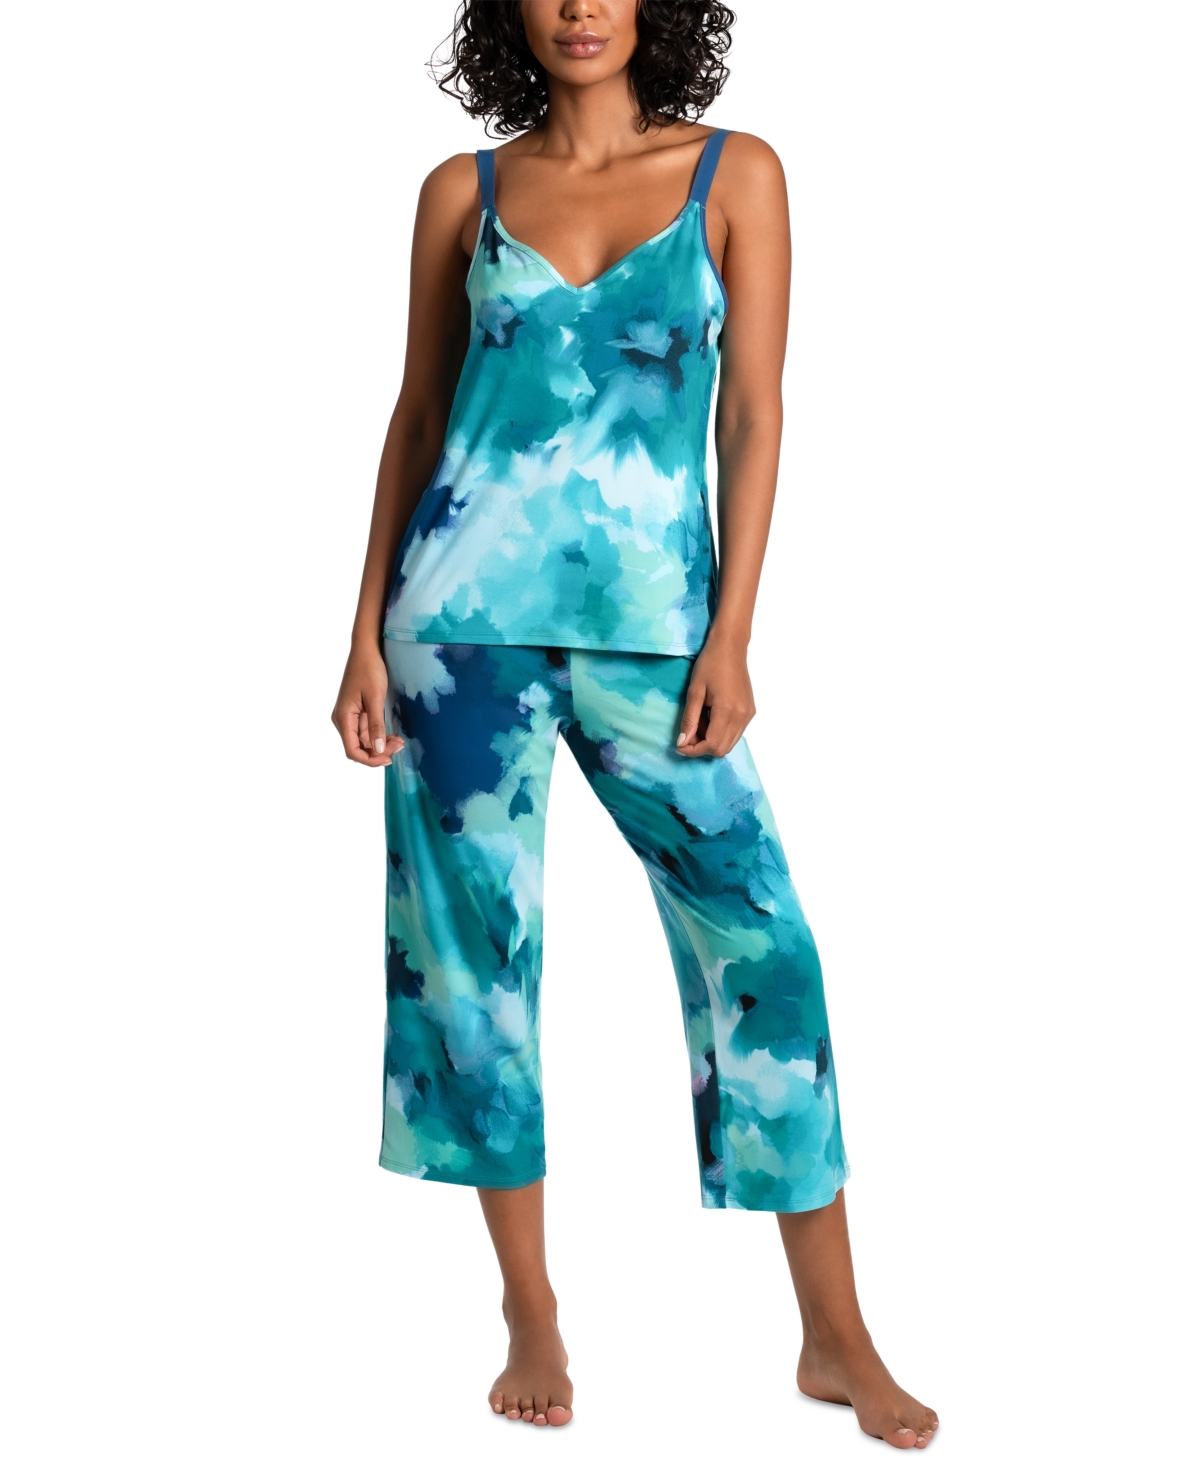 Women's 2-Pc. Clement Cropped Pajamas Set - Turquoise